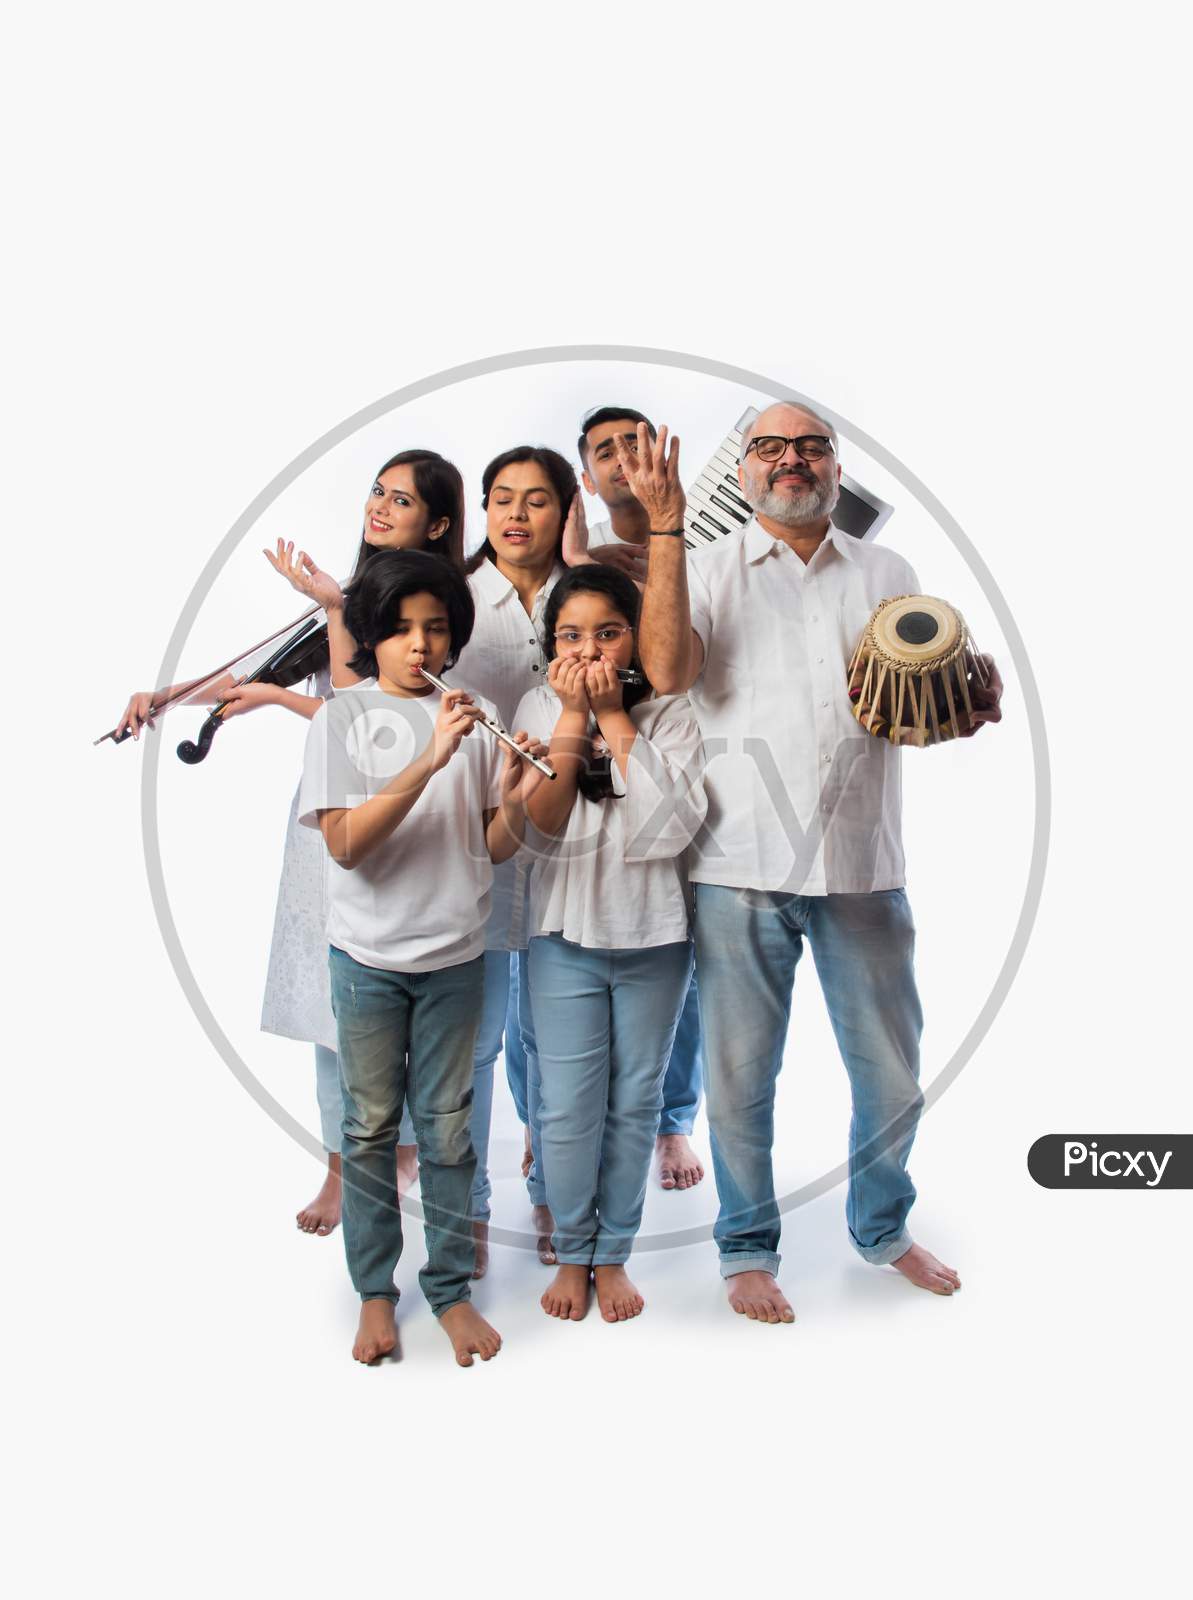 Indian Family Playing Music Instruments Together As A Band, Performing Against White